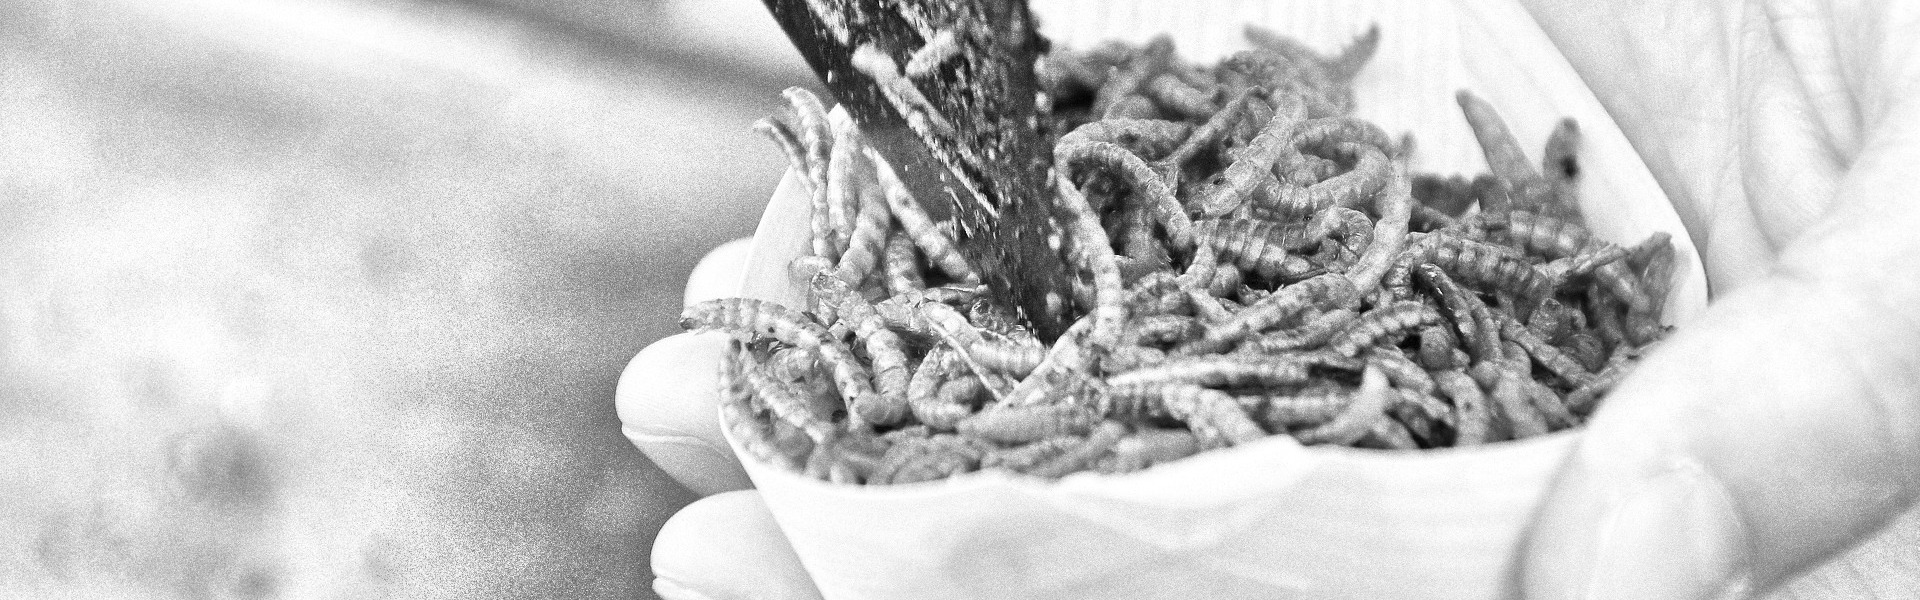 No Eating Insects,Pushback Shopping,Take Back Control